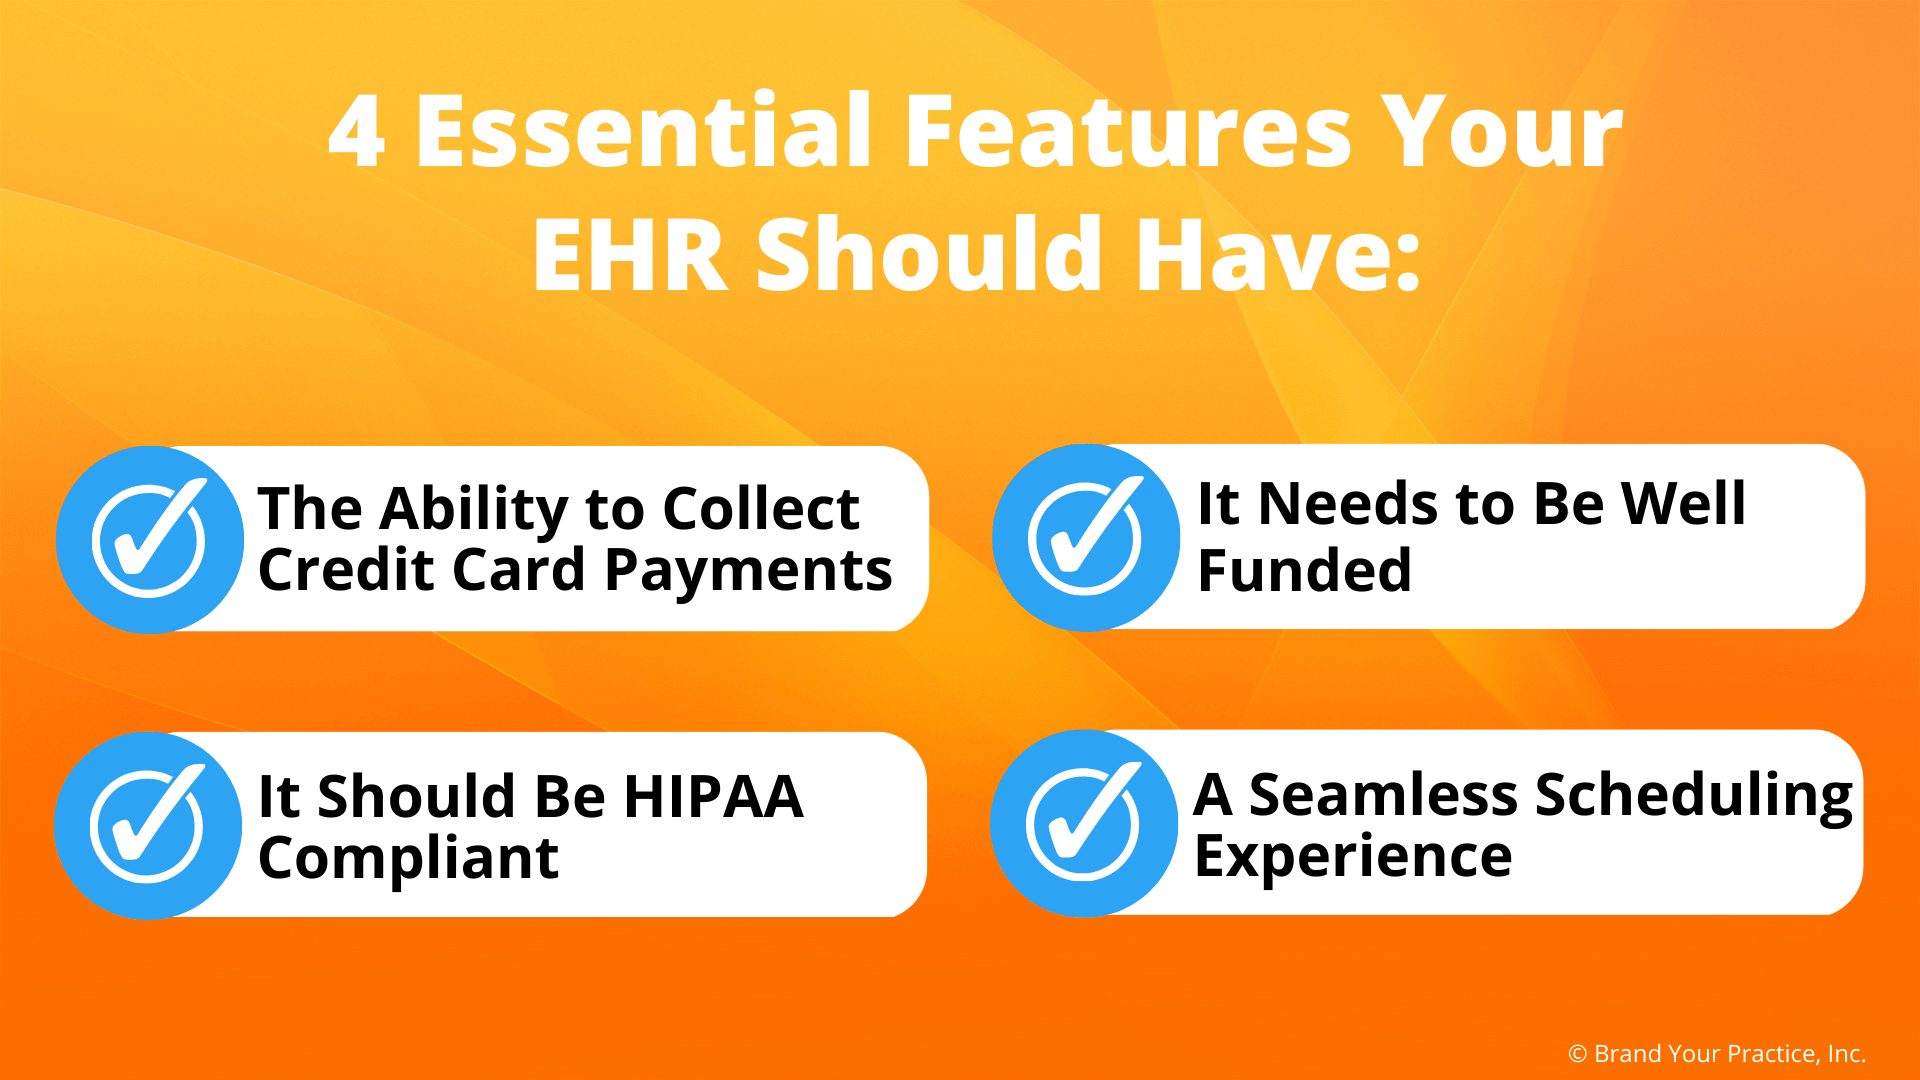 4 Essential EHR Features:<br /> 1. The ability to collect credit card payments<br /> 2. It needs to be well funded<br /> 3. It should be HIPAA compliant<br /> 4. A seamless scheduling experience